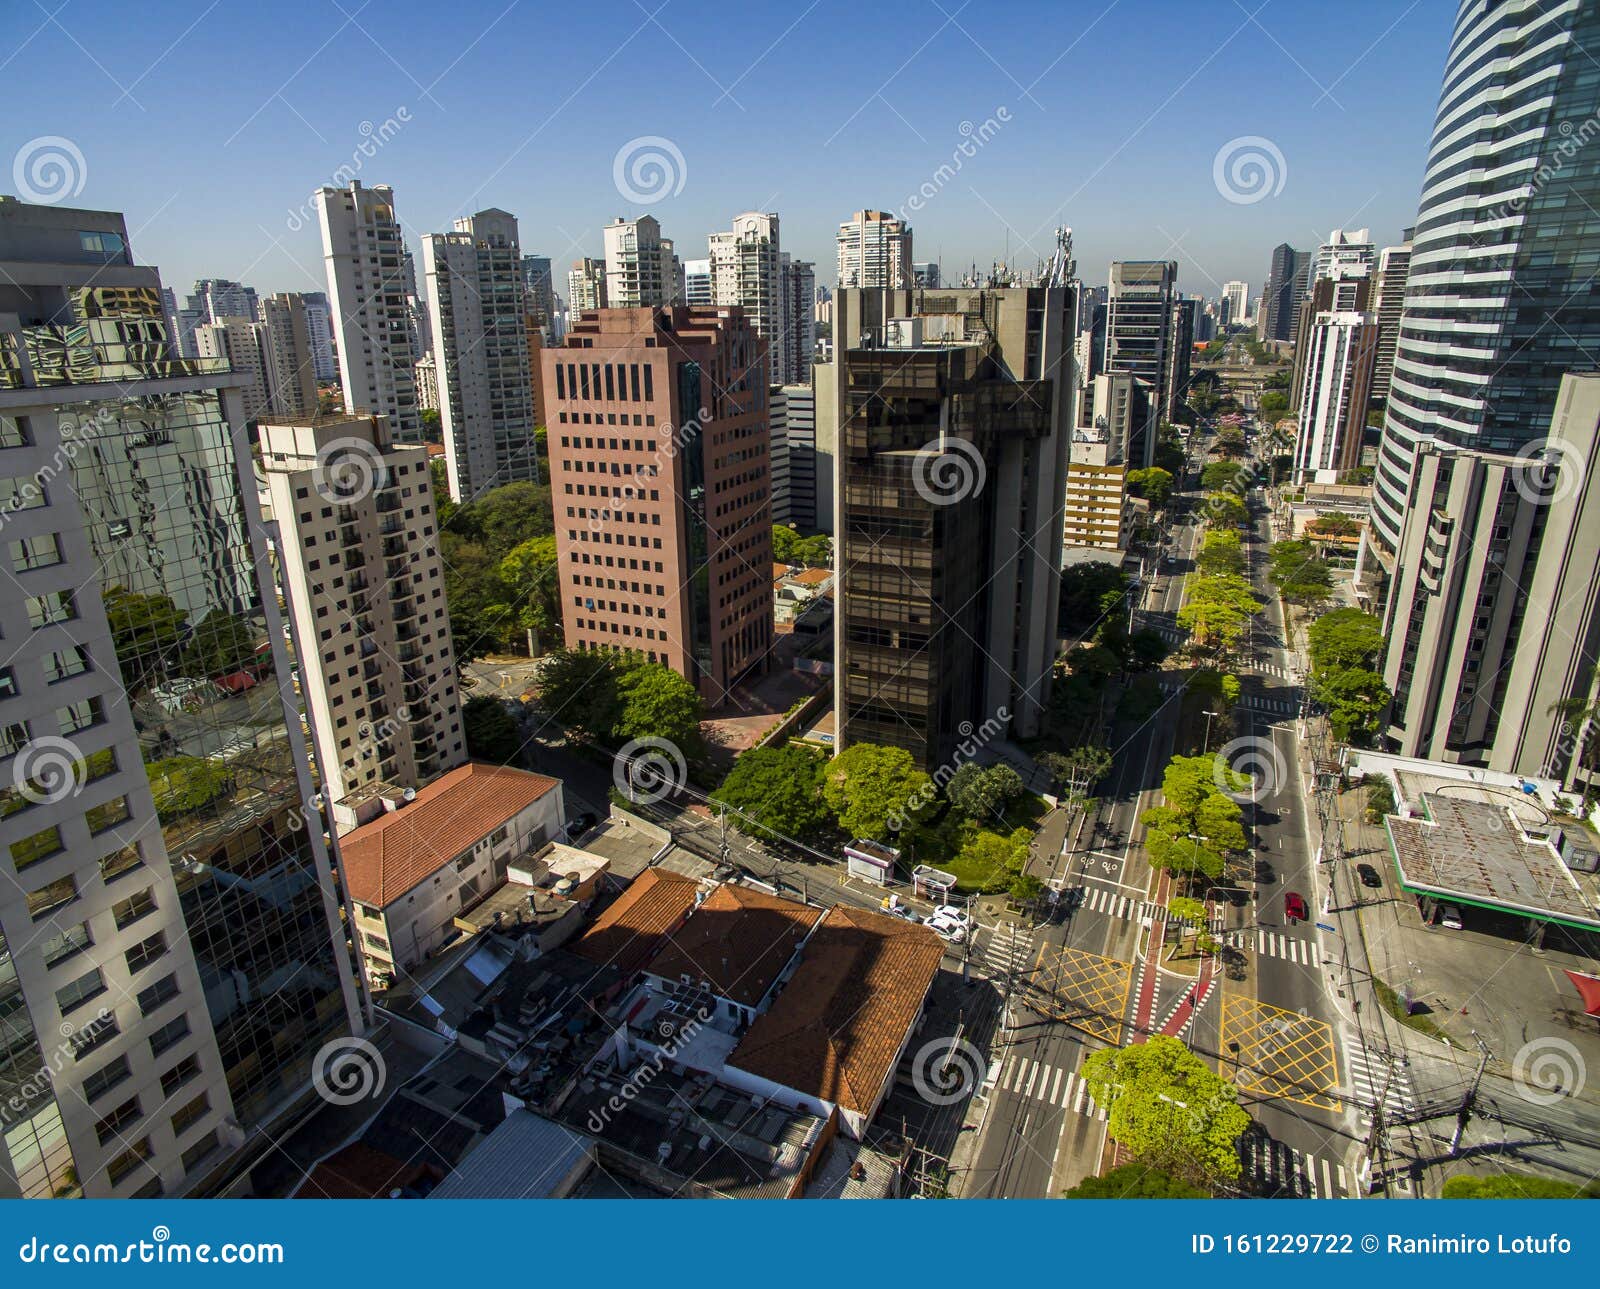 important cities of the world. important avenues of the world. sao paulo city.